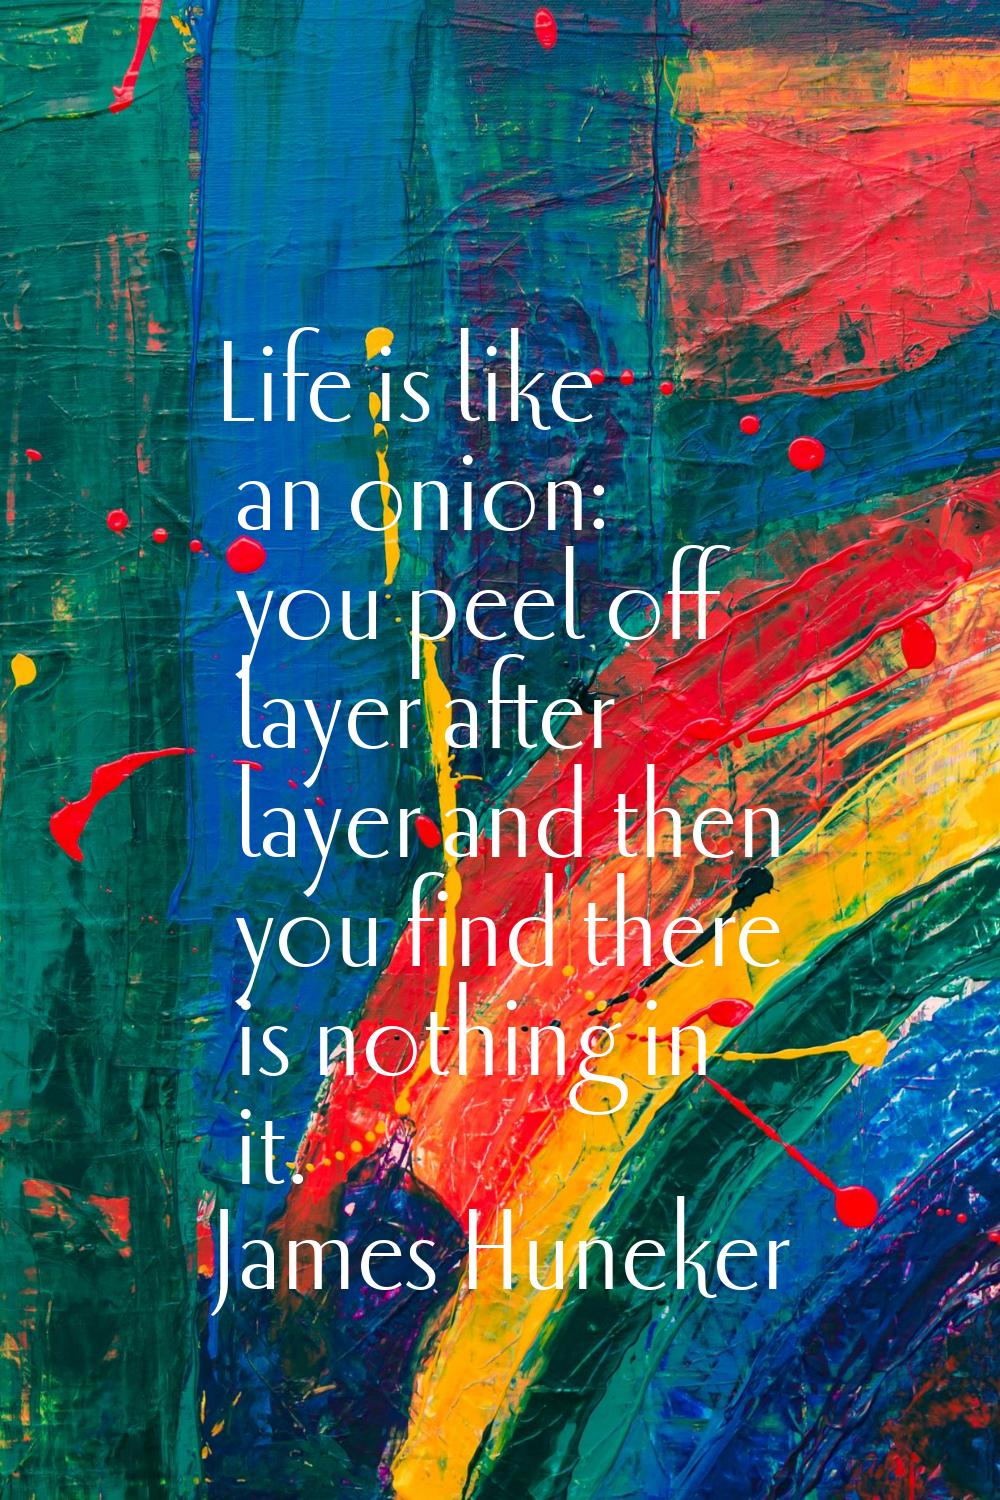 Life is like an onion: you peel off layer after layer and then you find there is nothing in it.